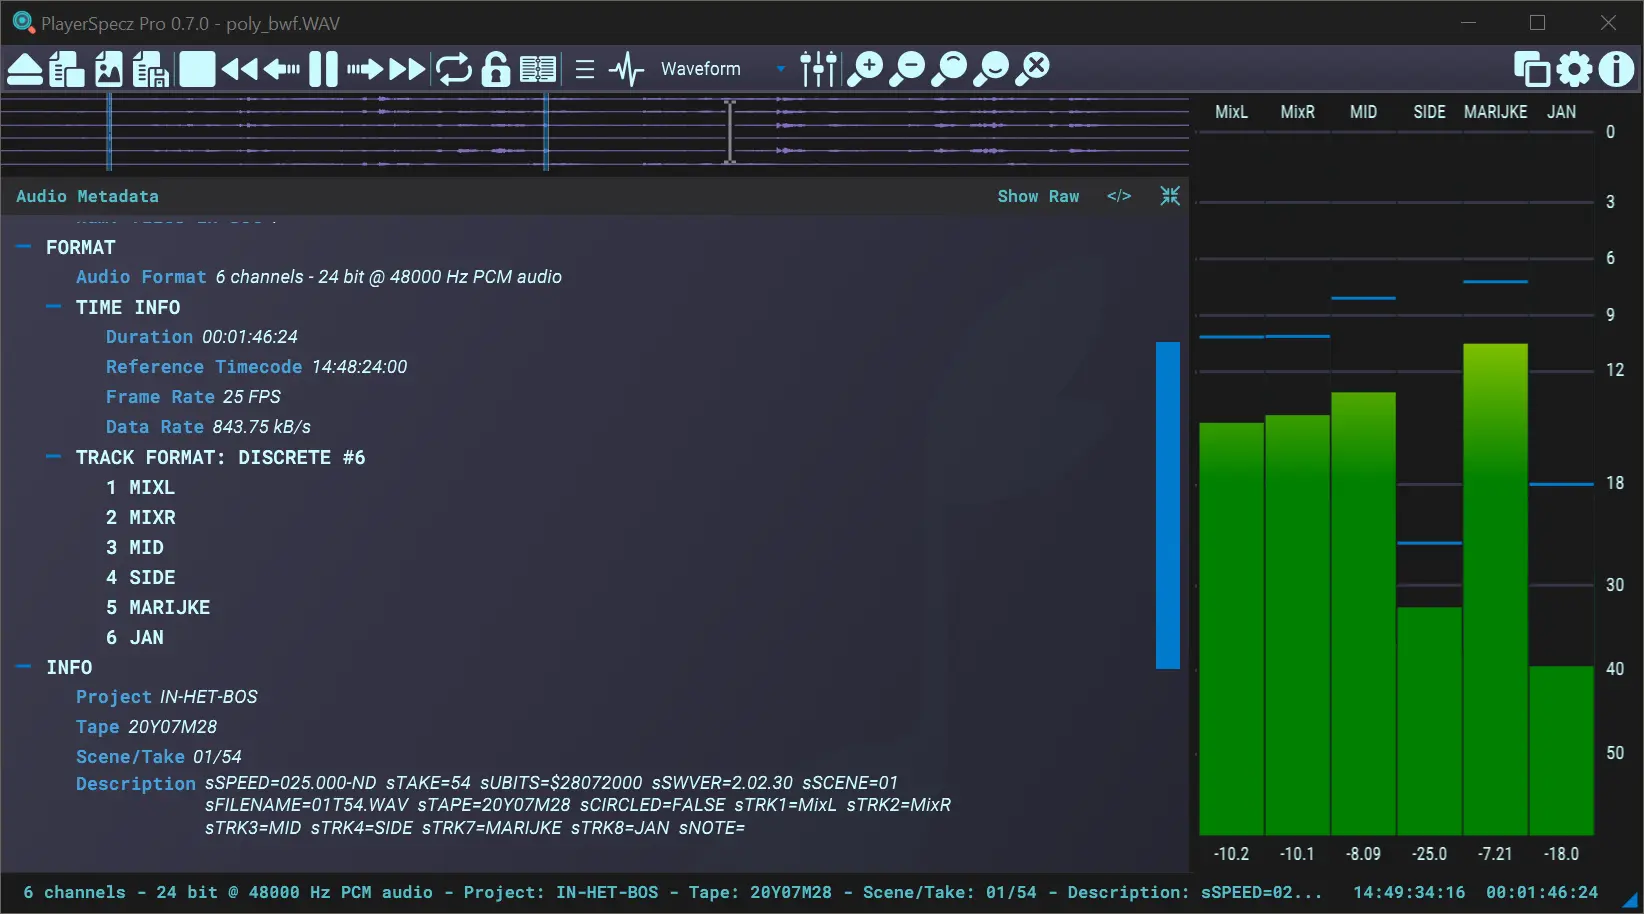 Graphical interface of PlayerSpecz, showing the metadata display off a multi-channel file.